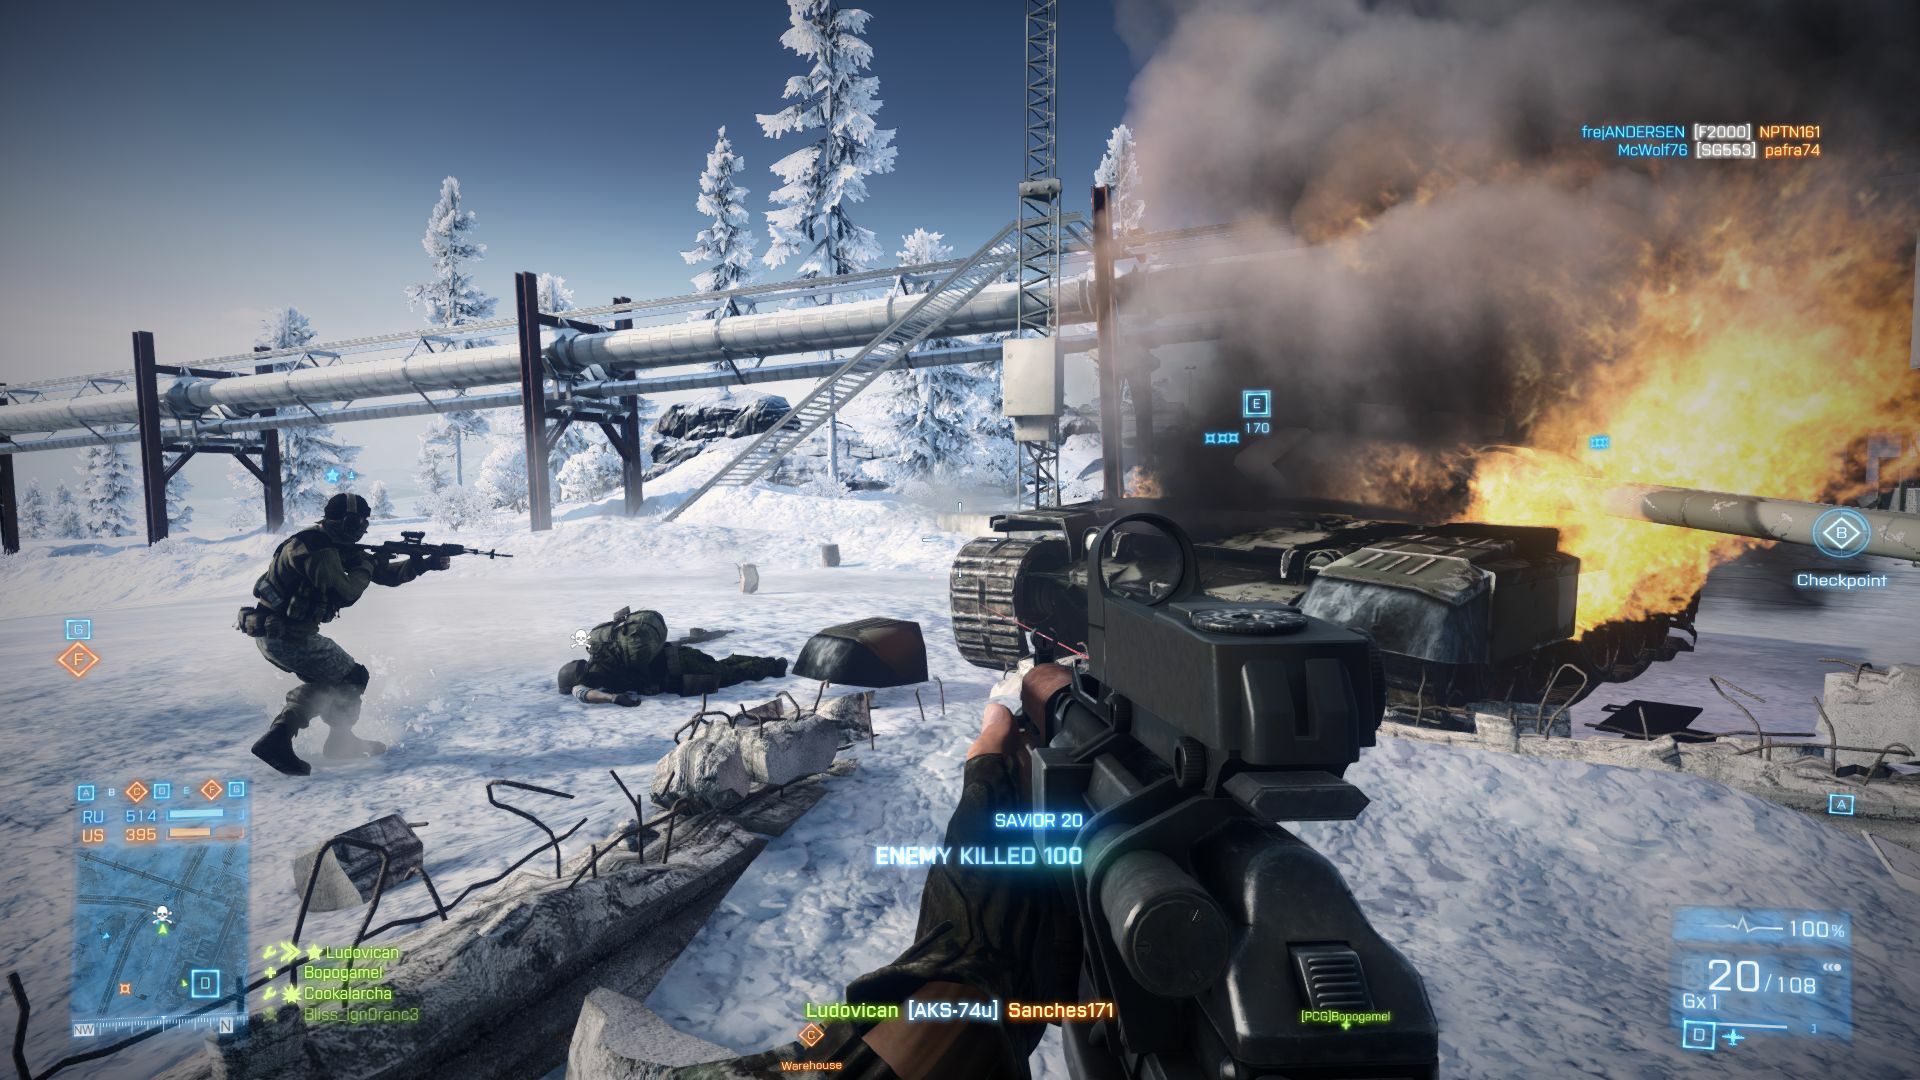 Download Battlefield 4 Game Full Version For PC